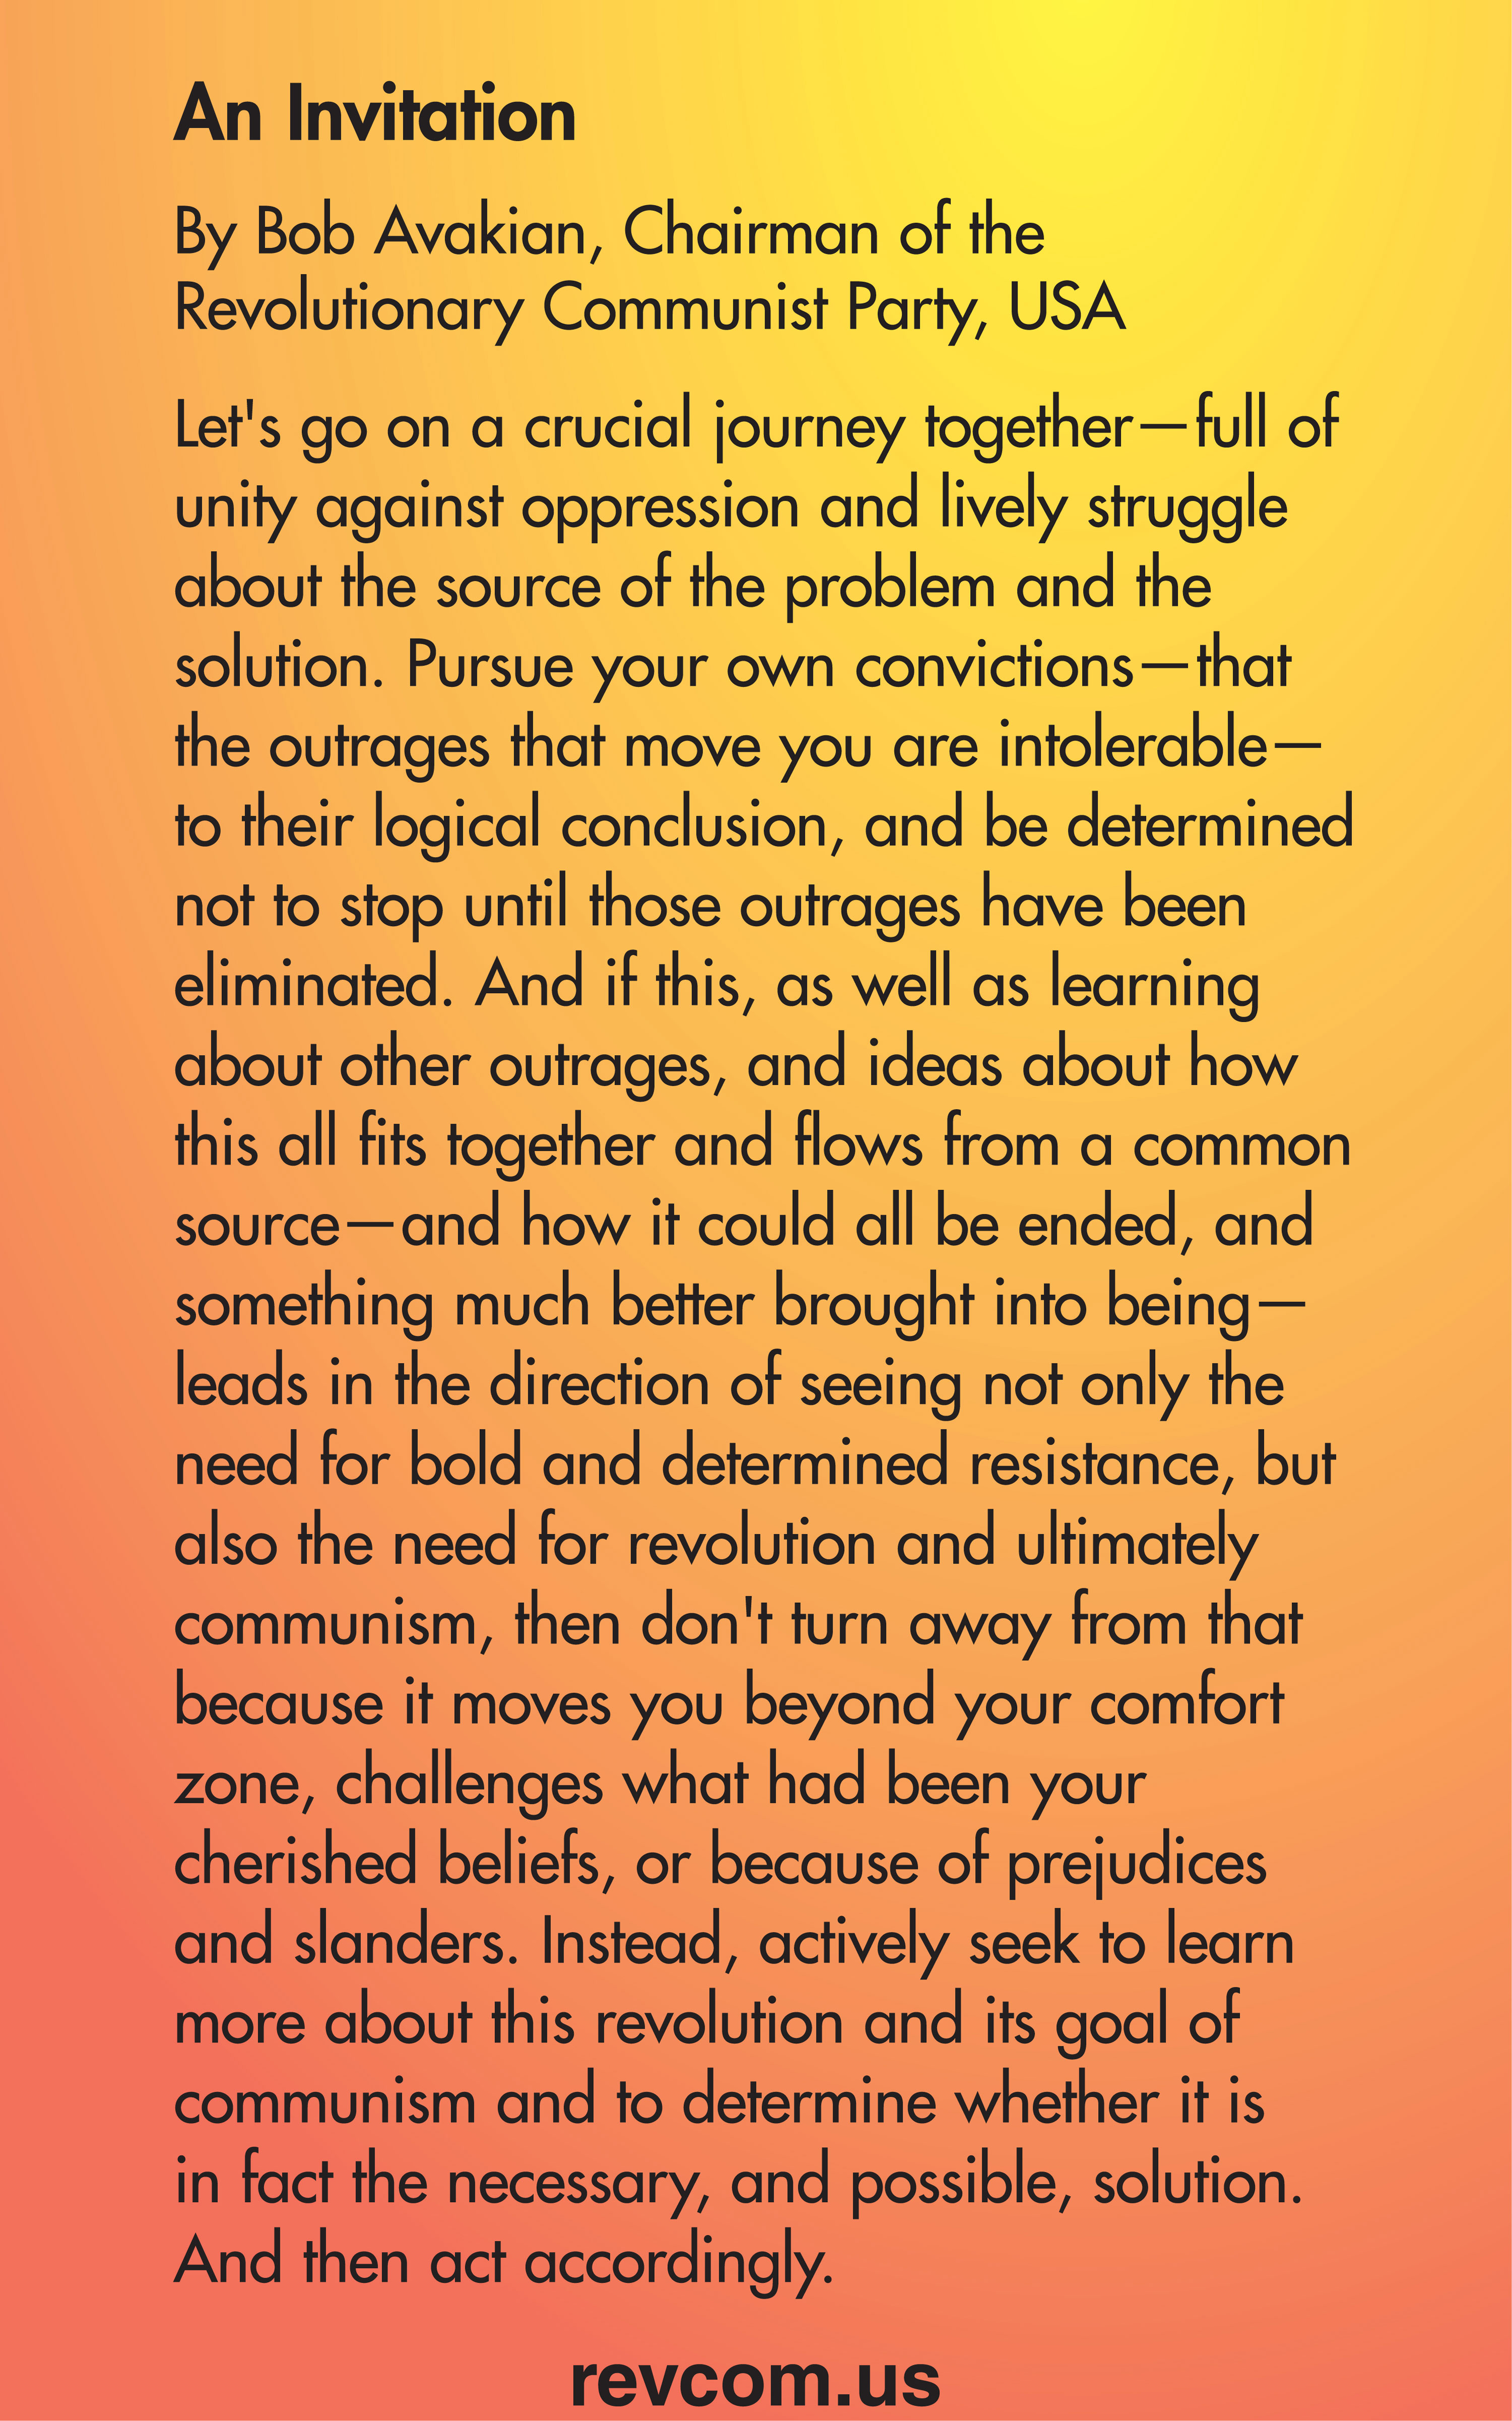 An invitation, by Bob Avakian, Chairman of the Revolutionary Communist Party, USA